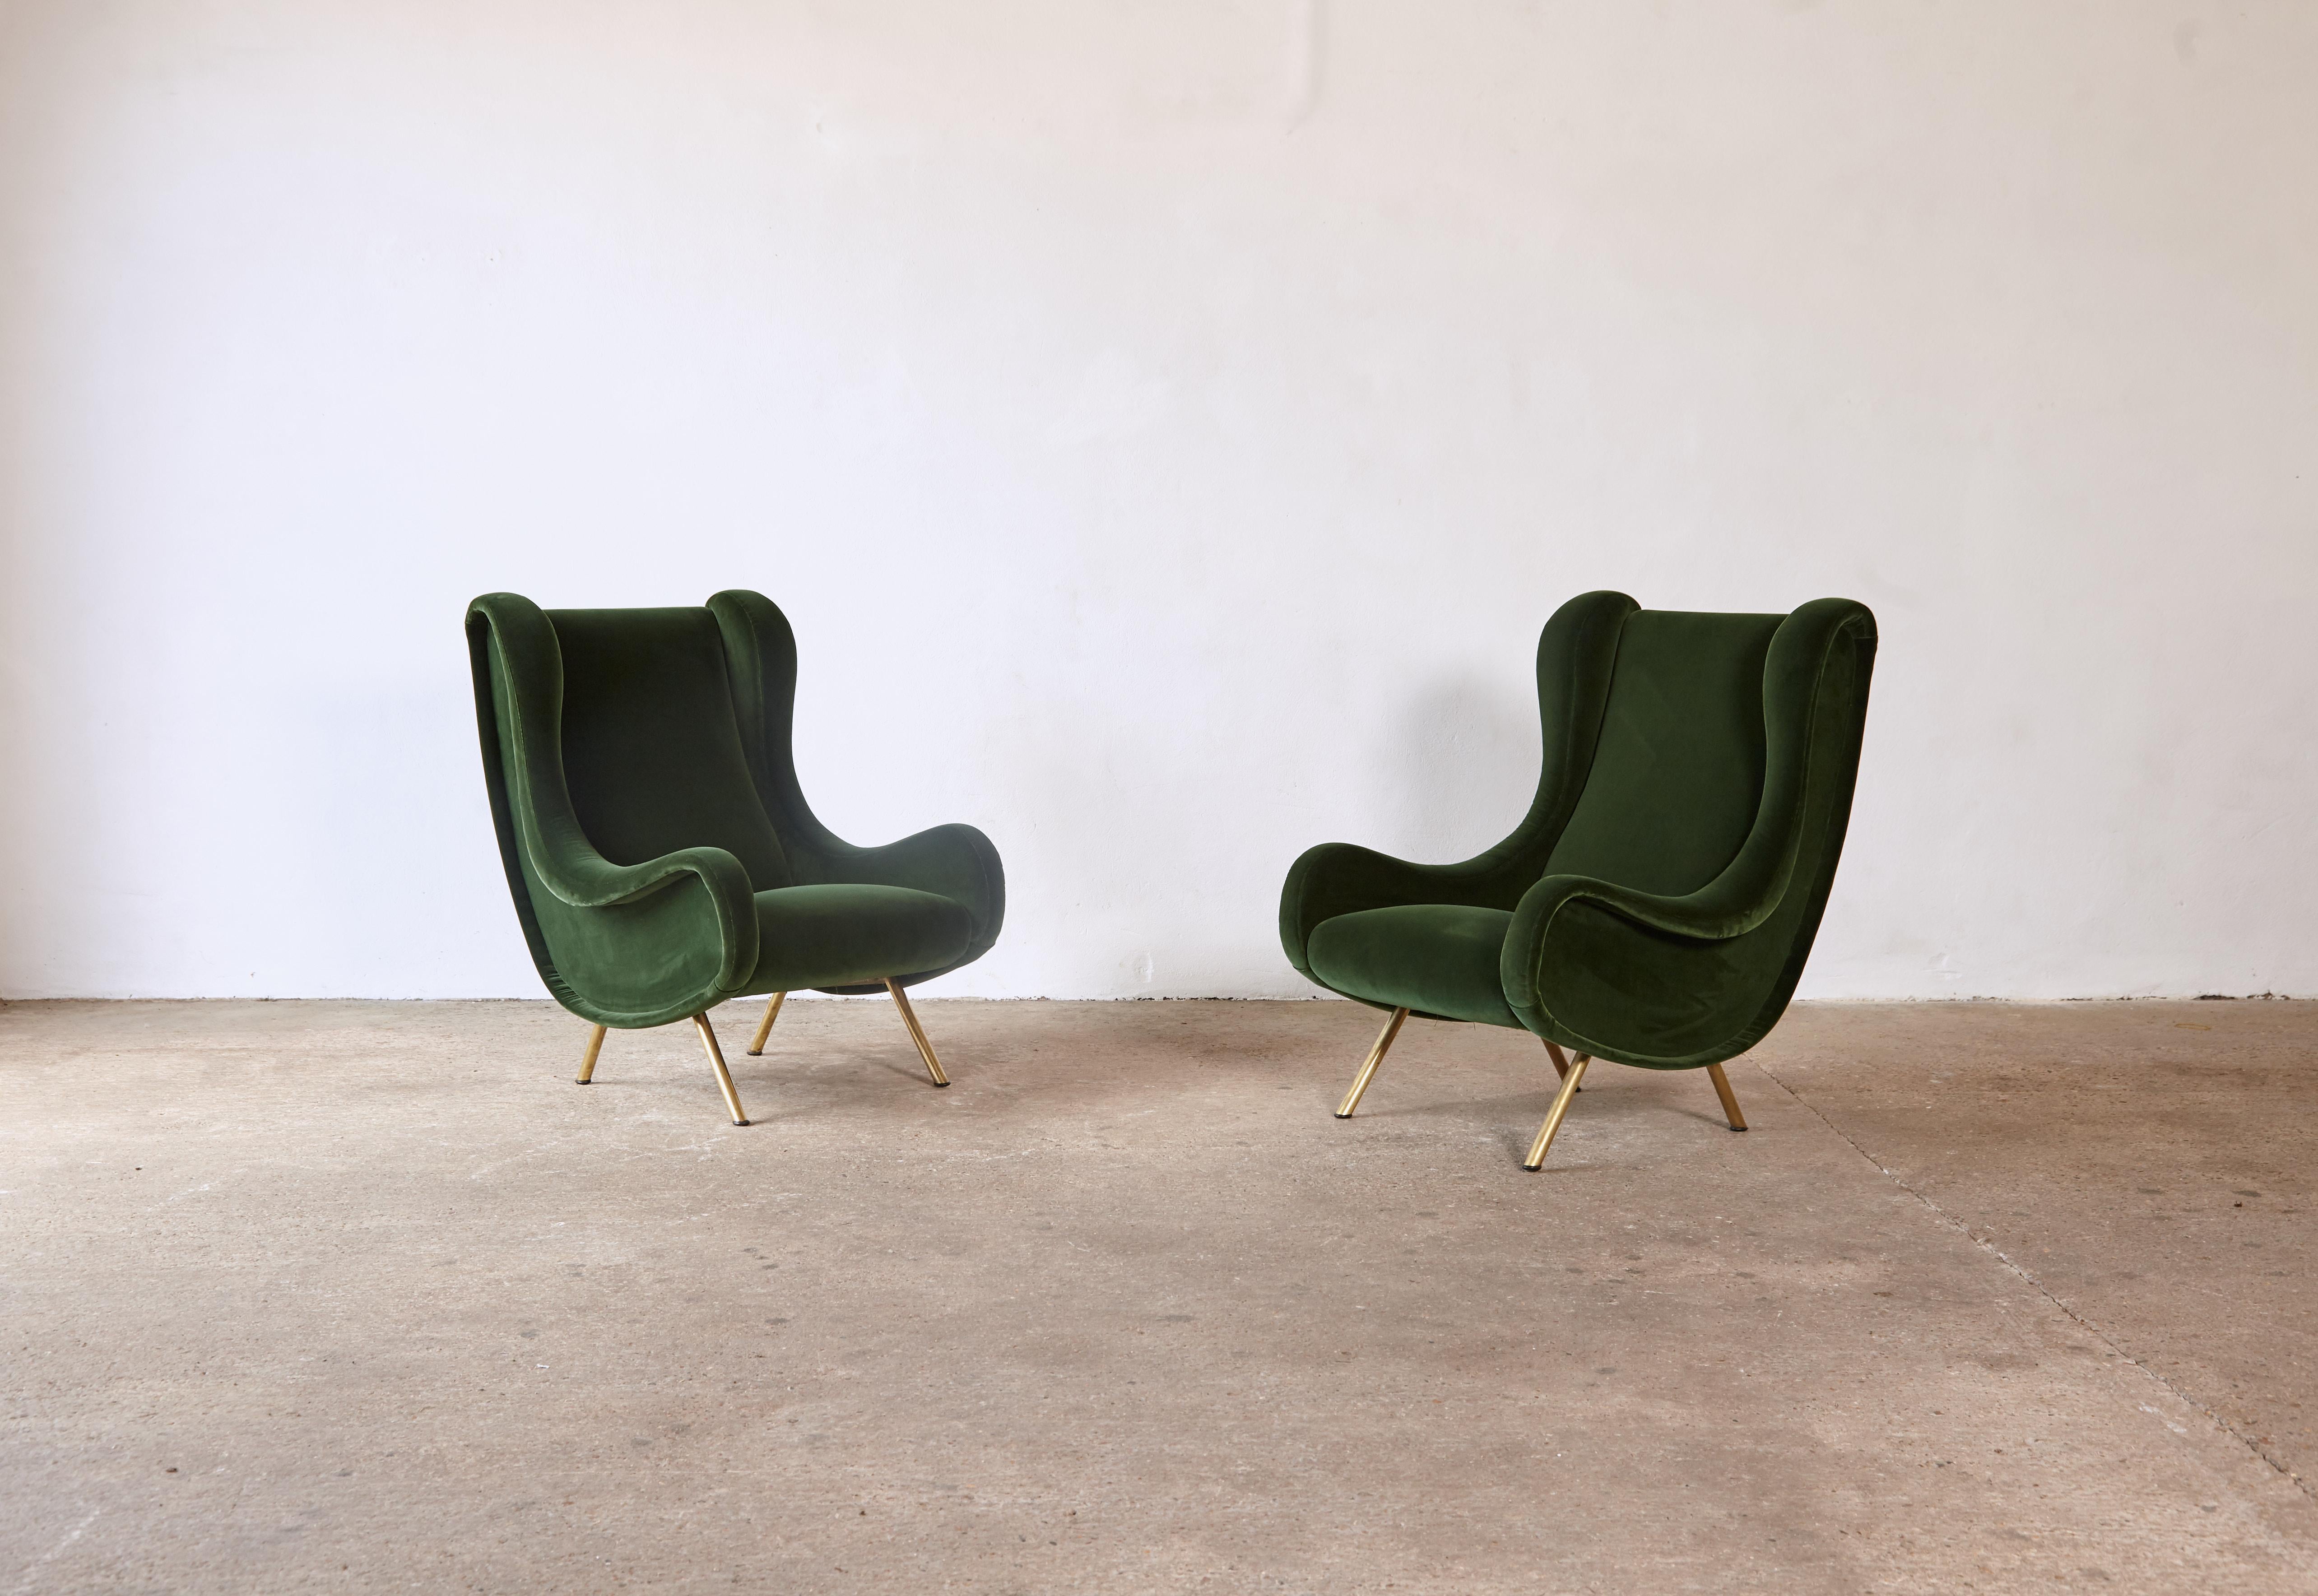 A pair of authentic Marco Zanuso senior chairs, Arflex, Italy, 1960s. These chairs have been newly reupholstered in a dark green velvet. Fast shipping worldwide.




UK customers please note: displayed prices do not include VAT.